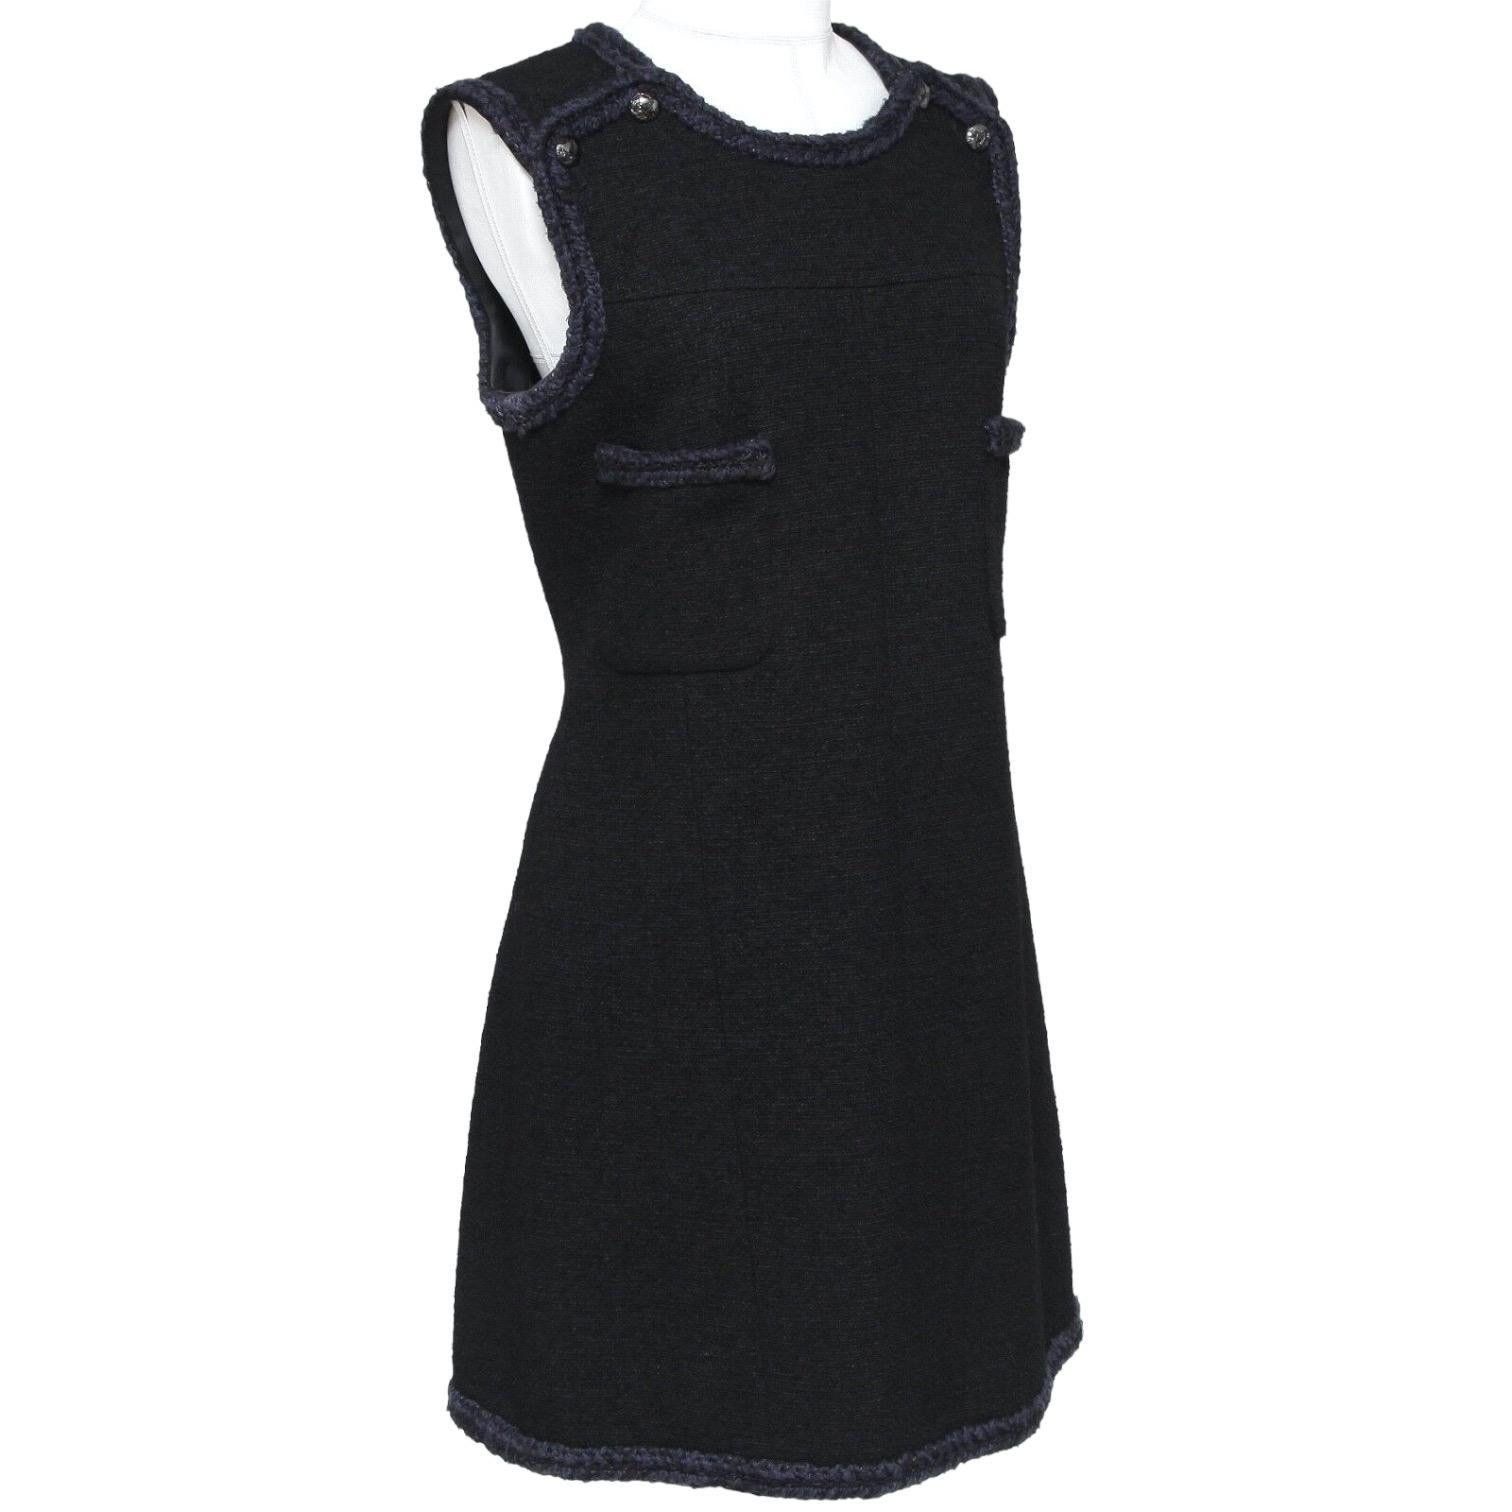 GUARANTEED AUTHENTIC CHANEL 2013 BLACK TWEED SLEEVELESS DRESS
 
Design:
- Classic black tweed sleeveless dress navy braided trim throughout.
- Dual pockets at chest.
- Signature buttons at shoulders.
- Concealed zipper closure at center back.
-